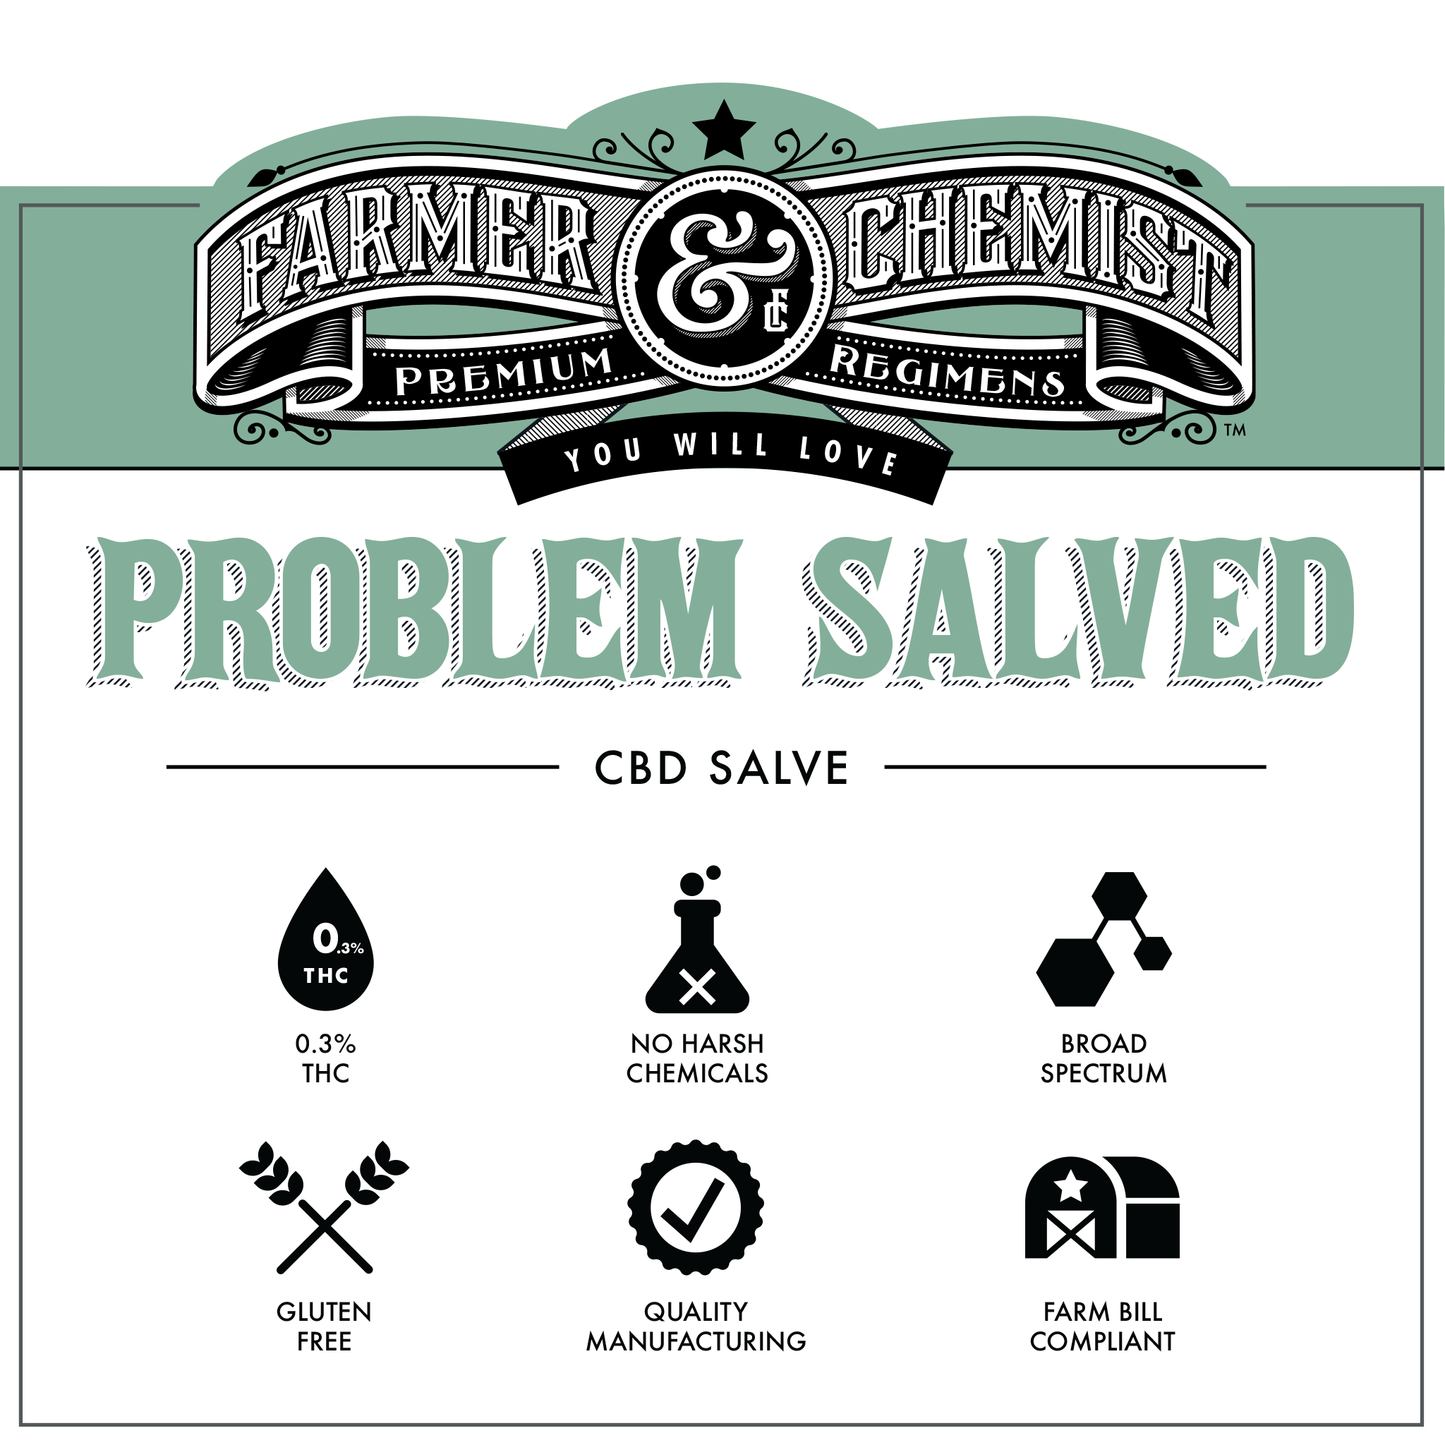 PROBLEM SALVED - 1oz. 2000mg with Eucalyptus and Peppermint (Case pack of 4)